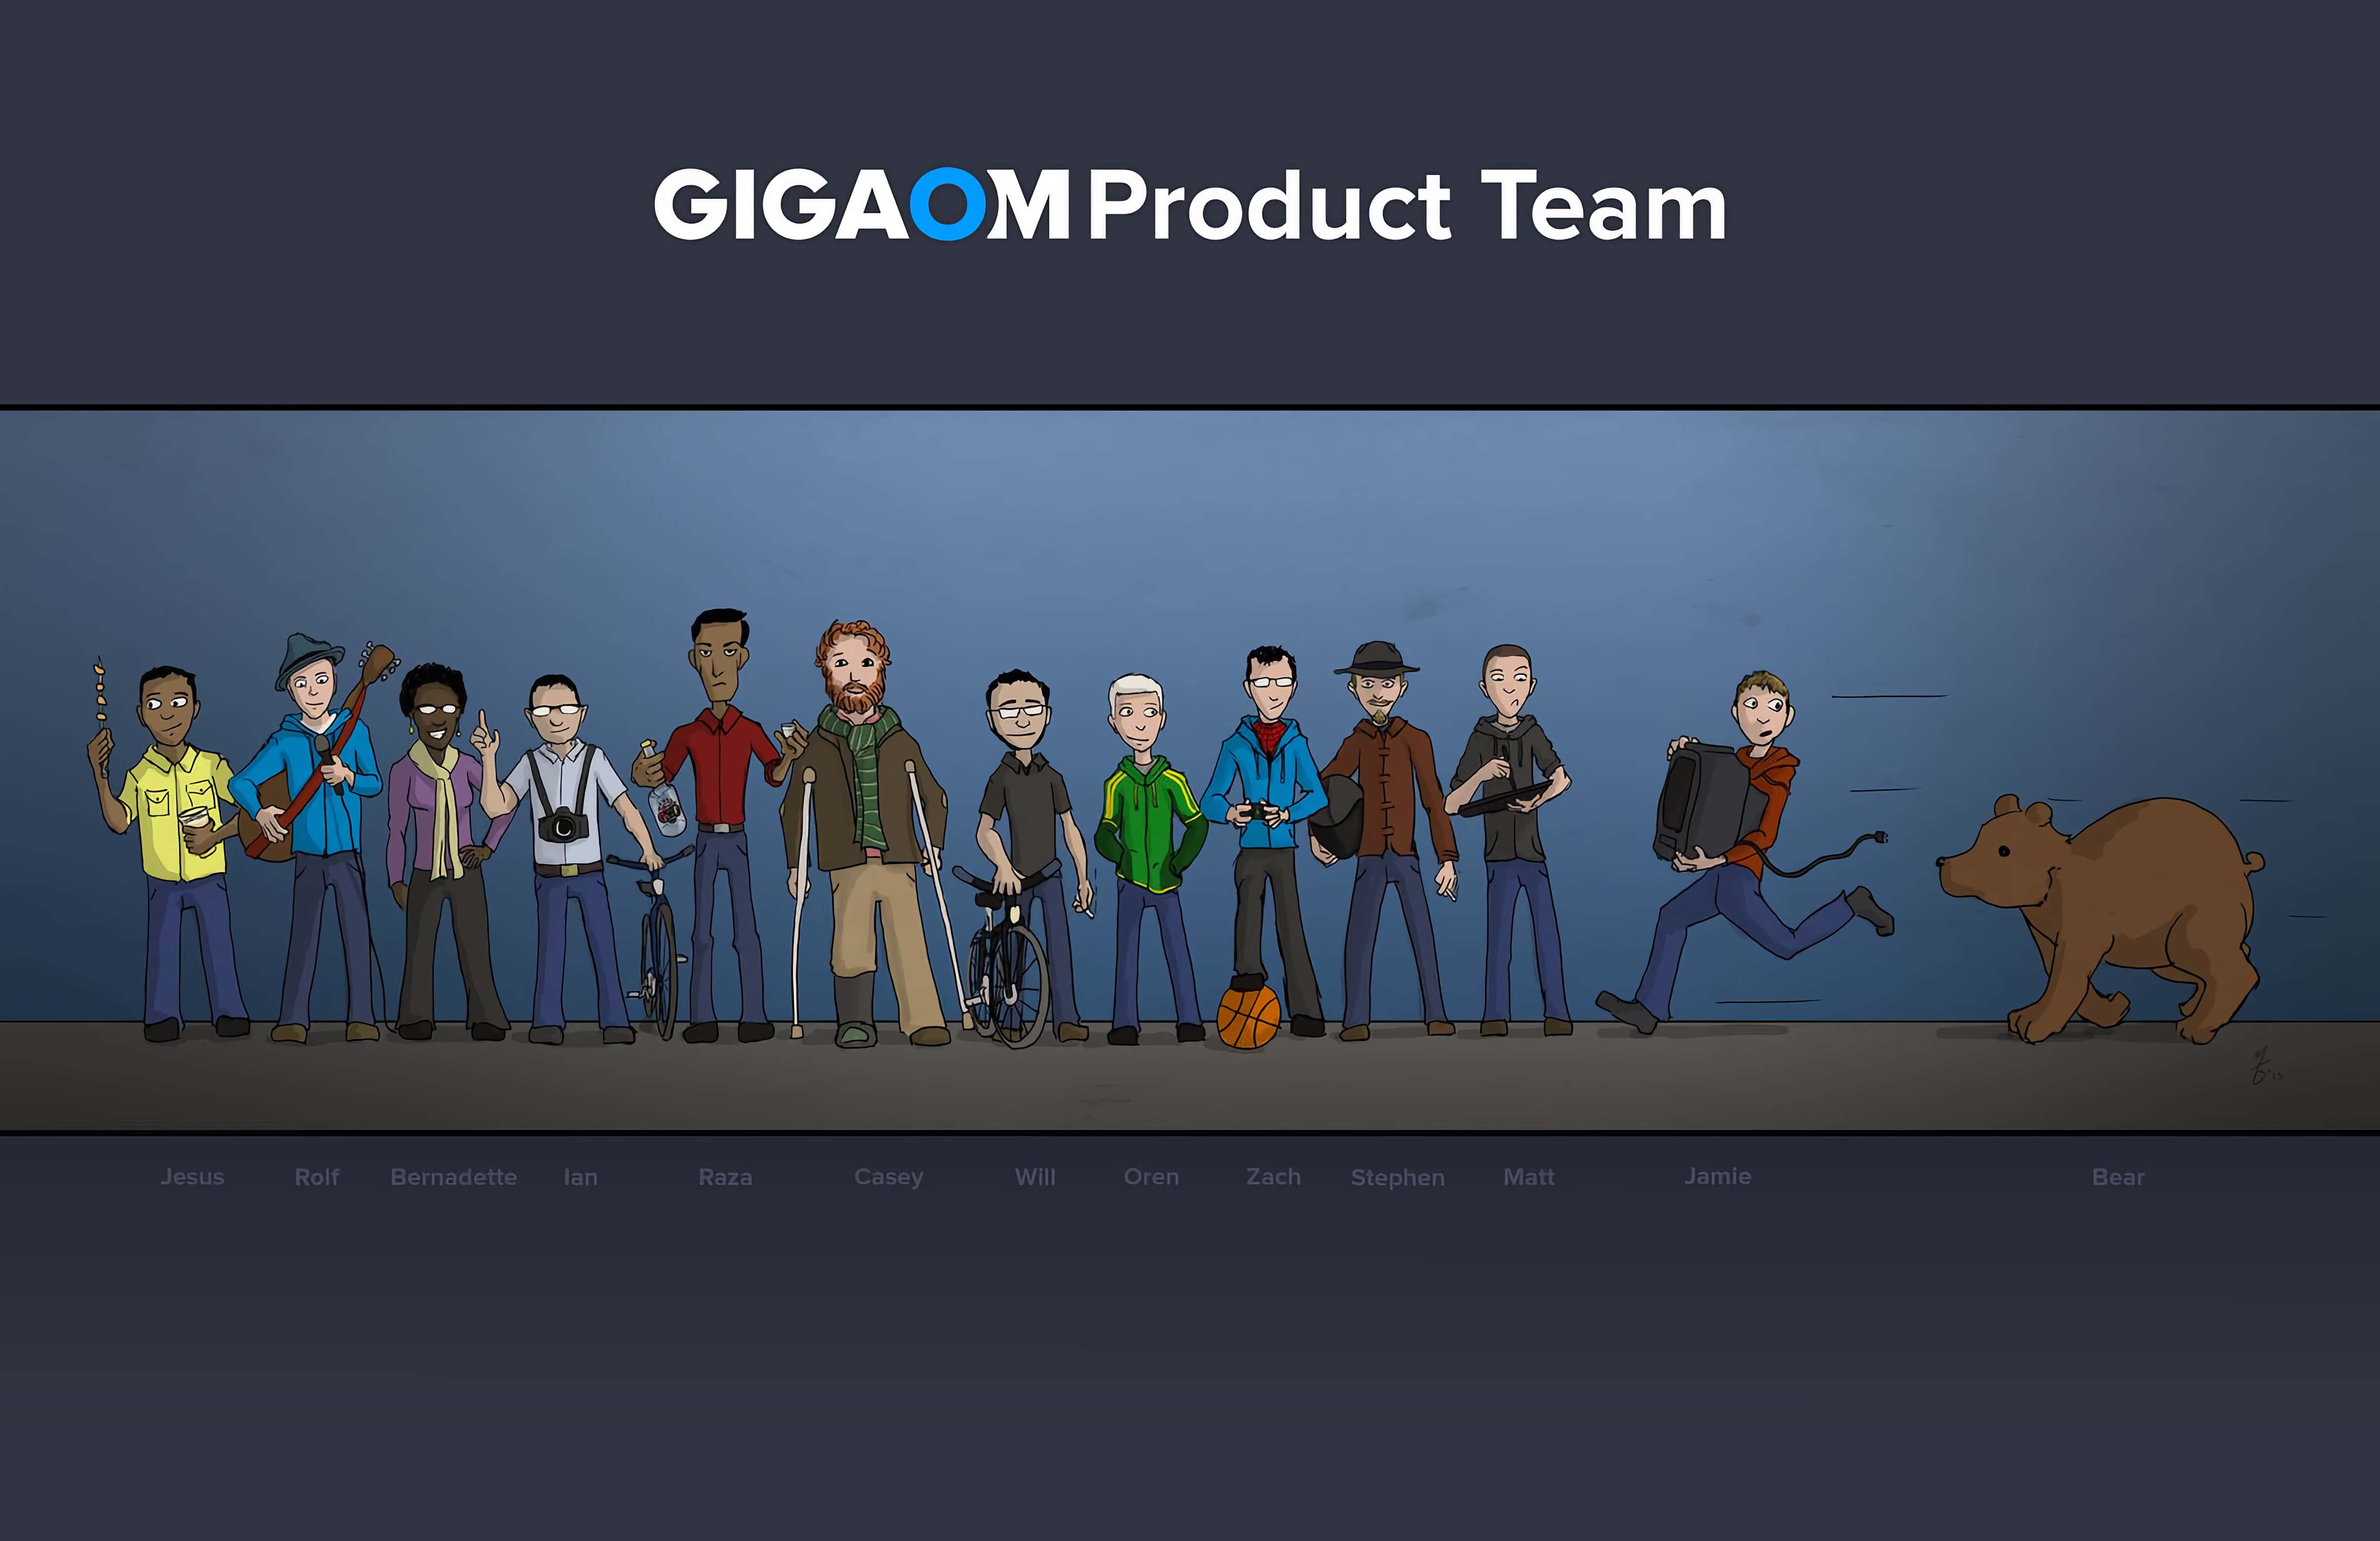 The product team by Matt @borkweb. Clearly, I will never live down my broken ankle with this group.